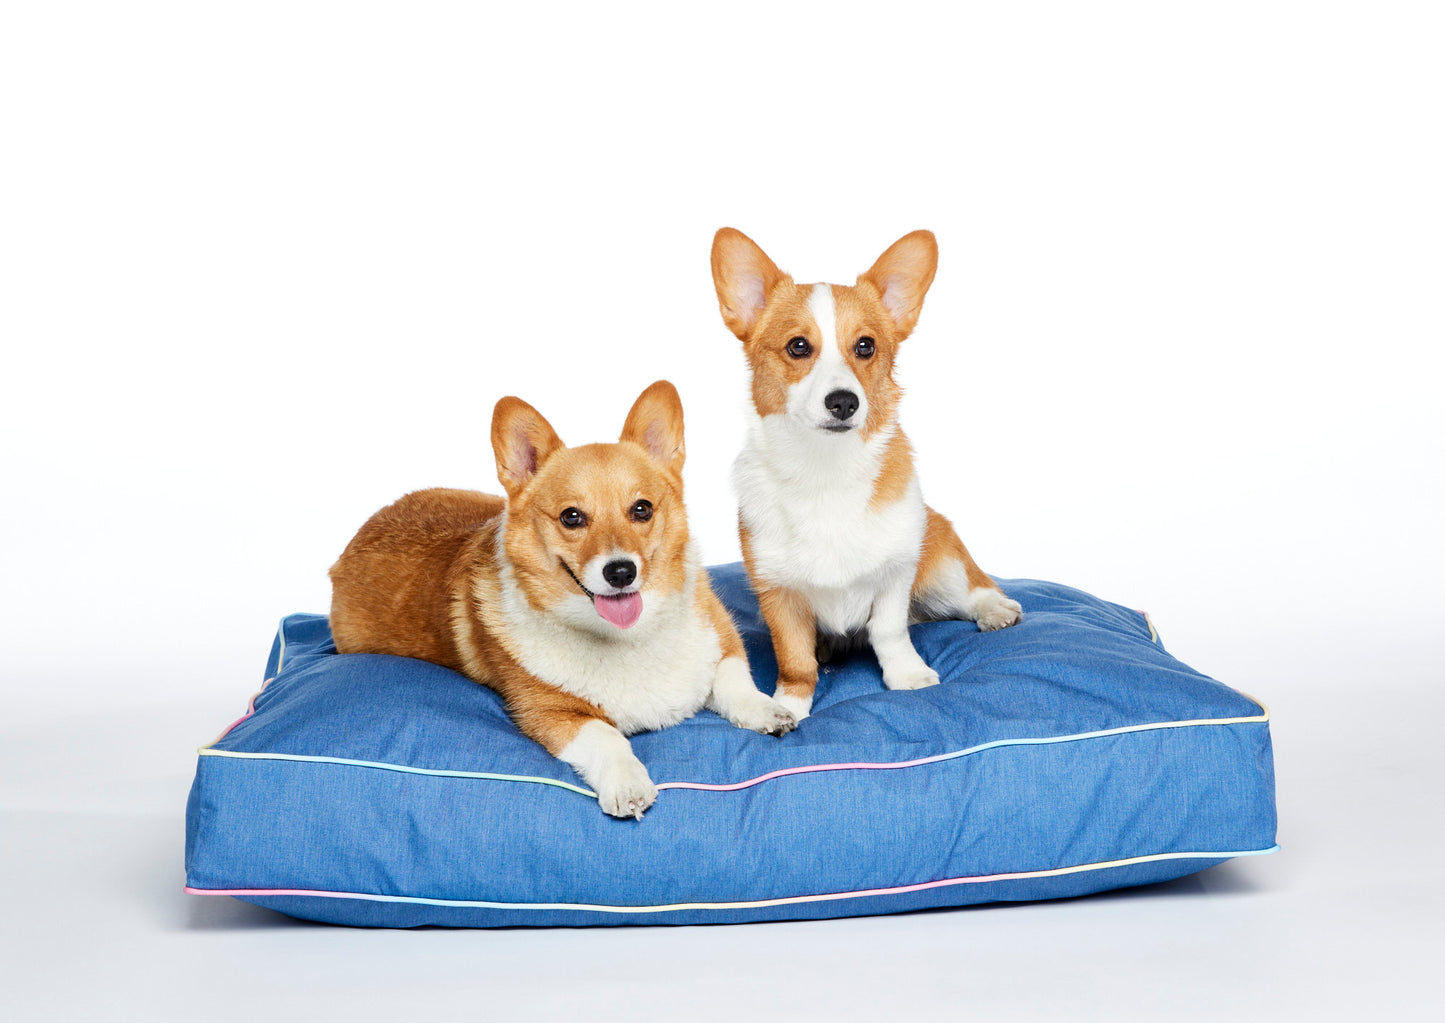 cool denim modern dog bed with stylish trim and 2 corgis perched on top